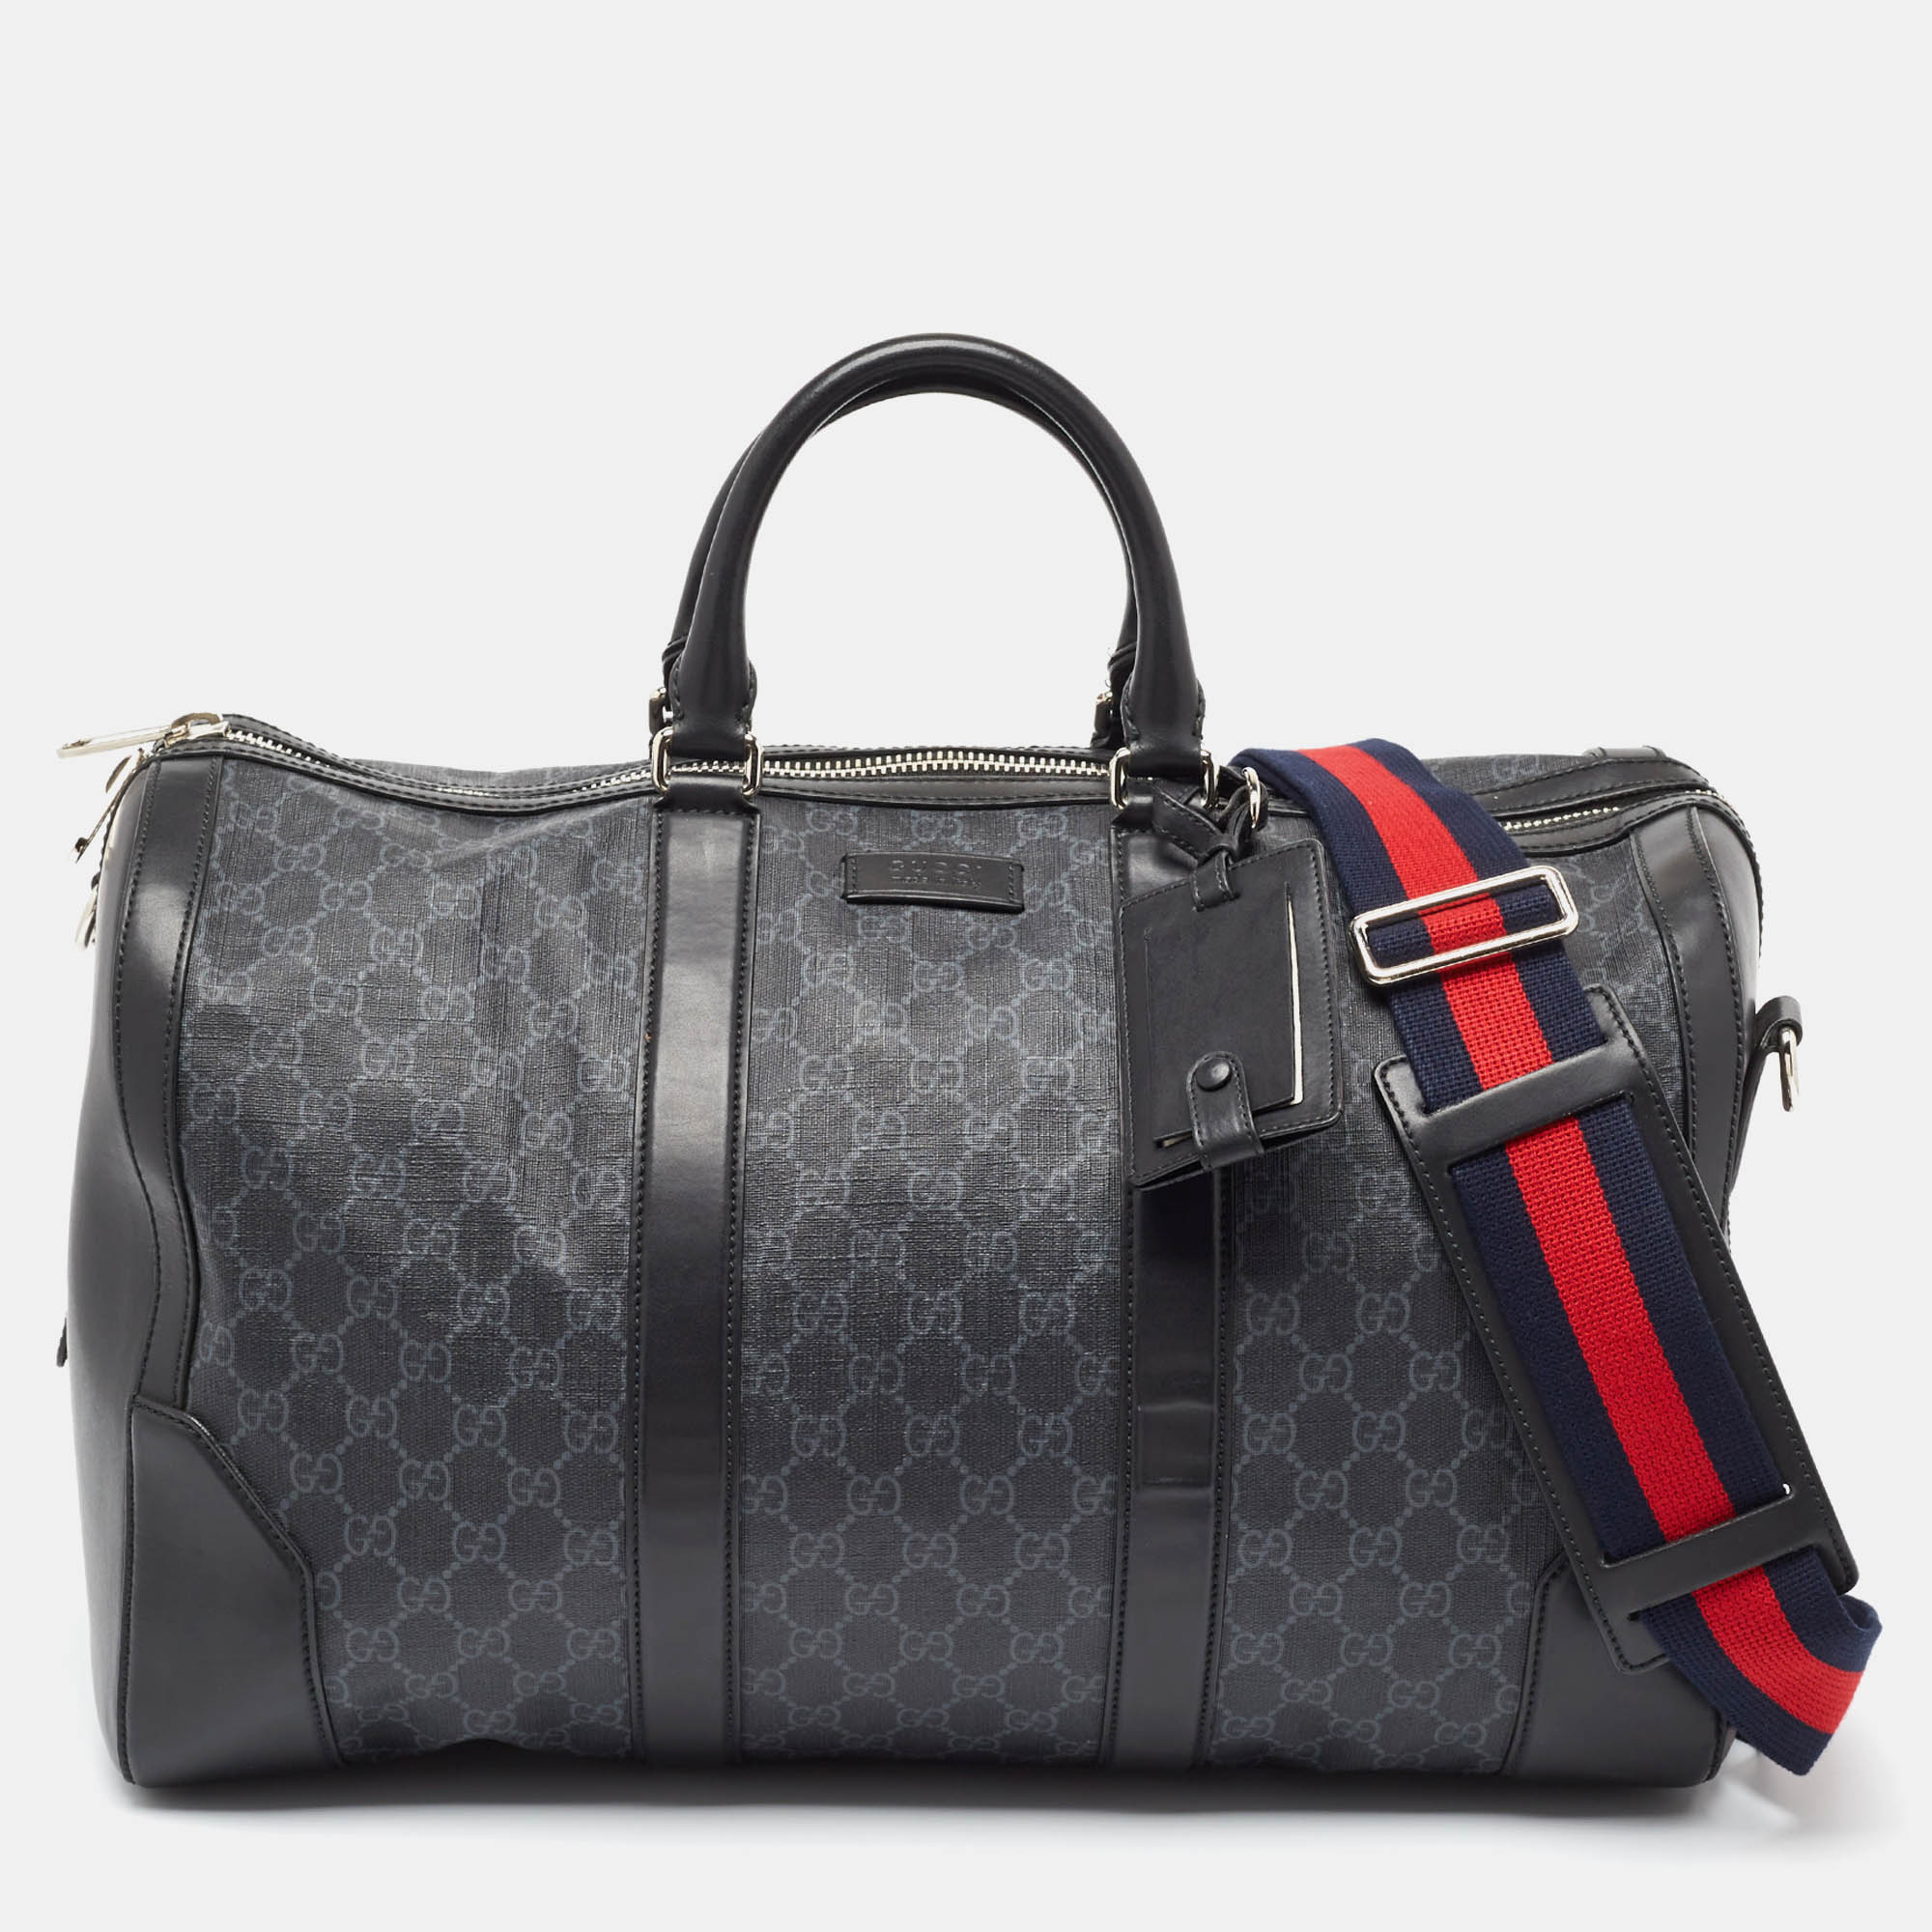 Gucci black gg supreme canvas and leather medium  carry-on duffle bag